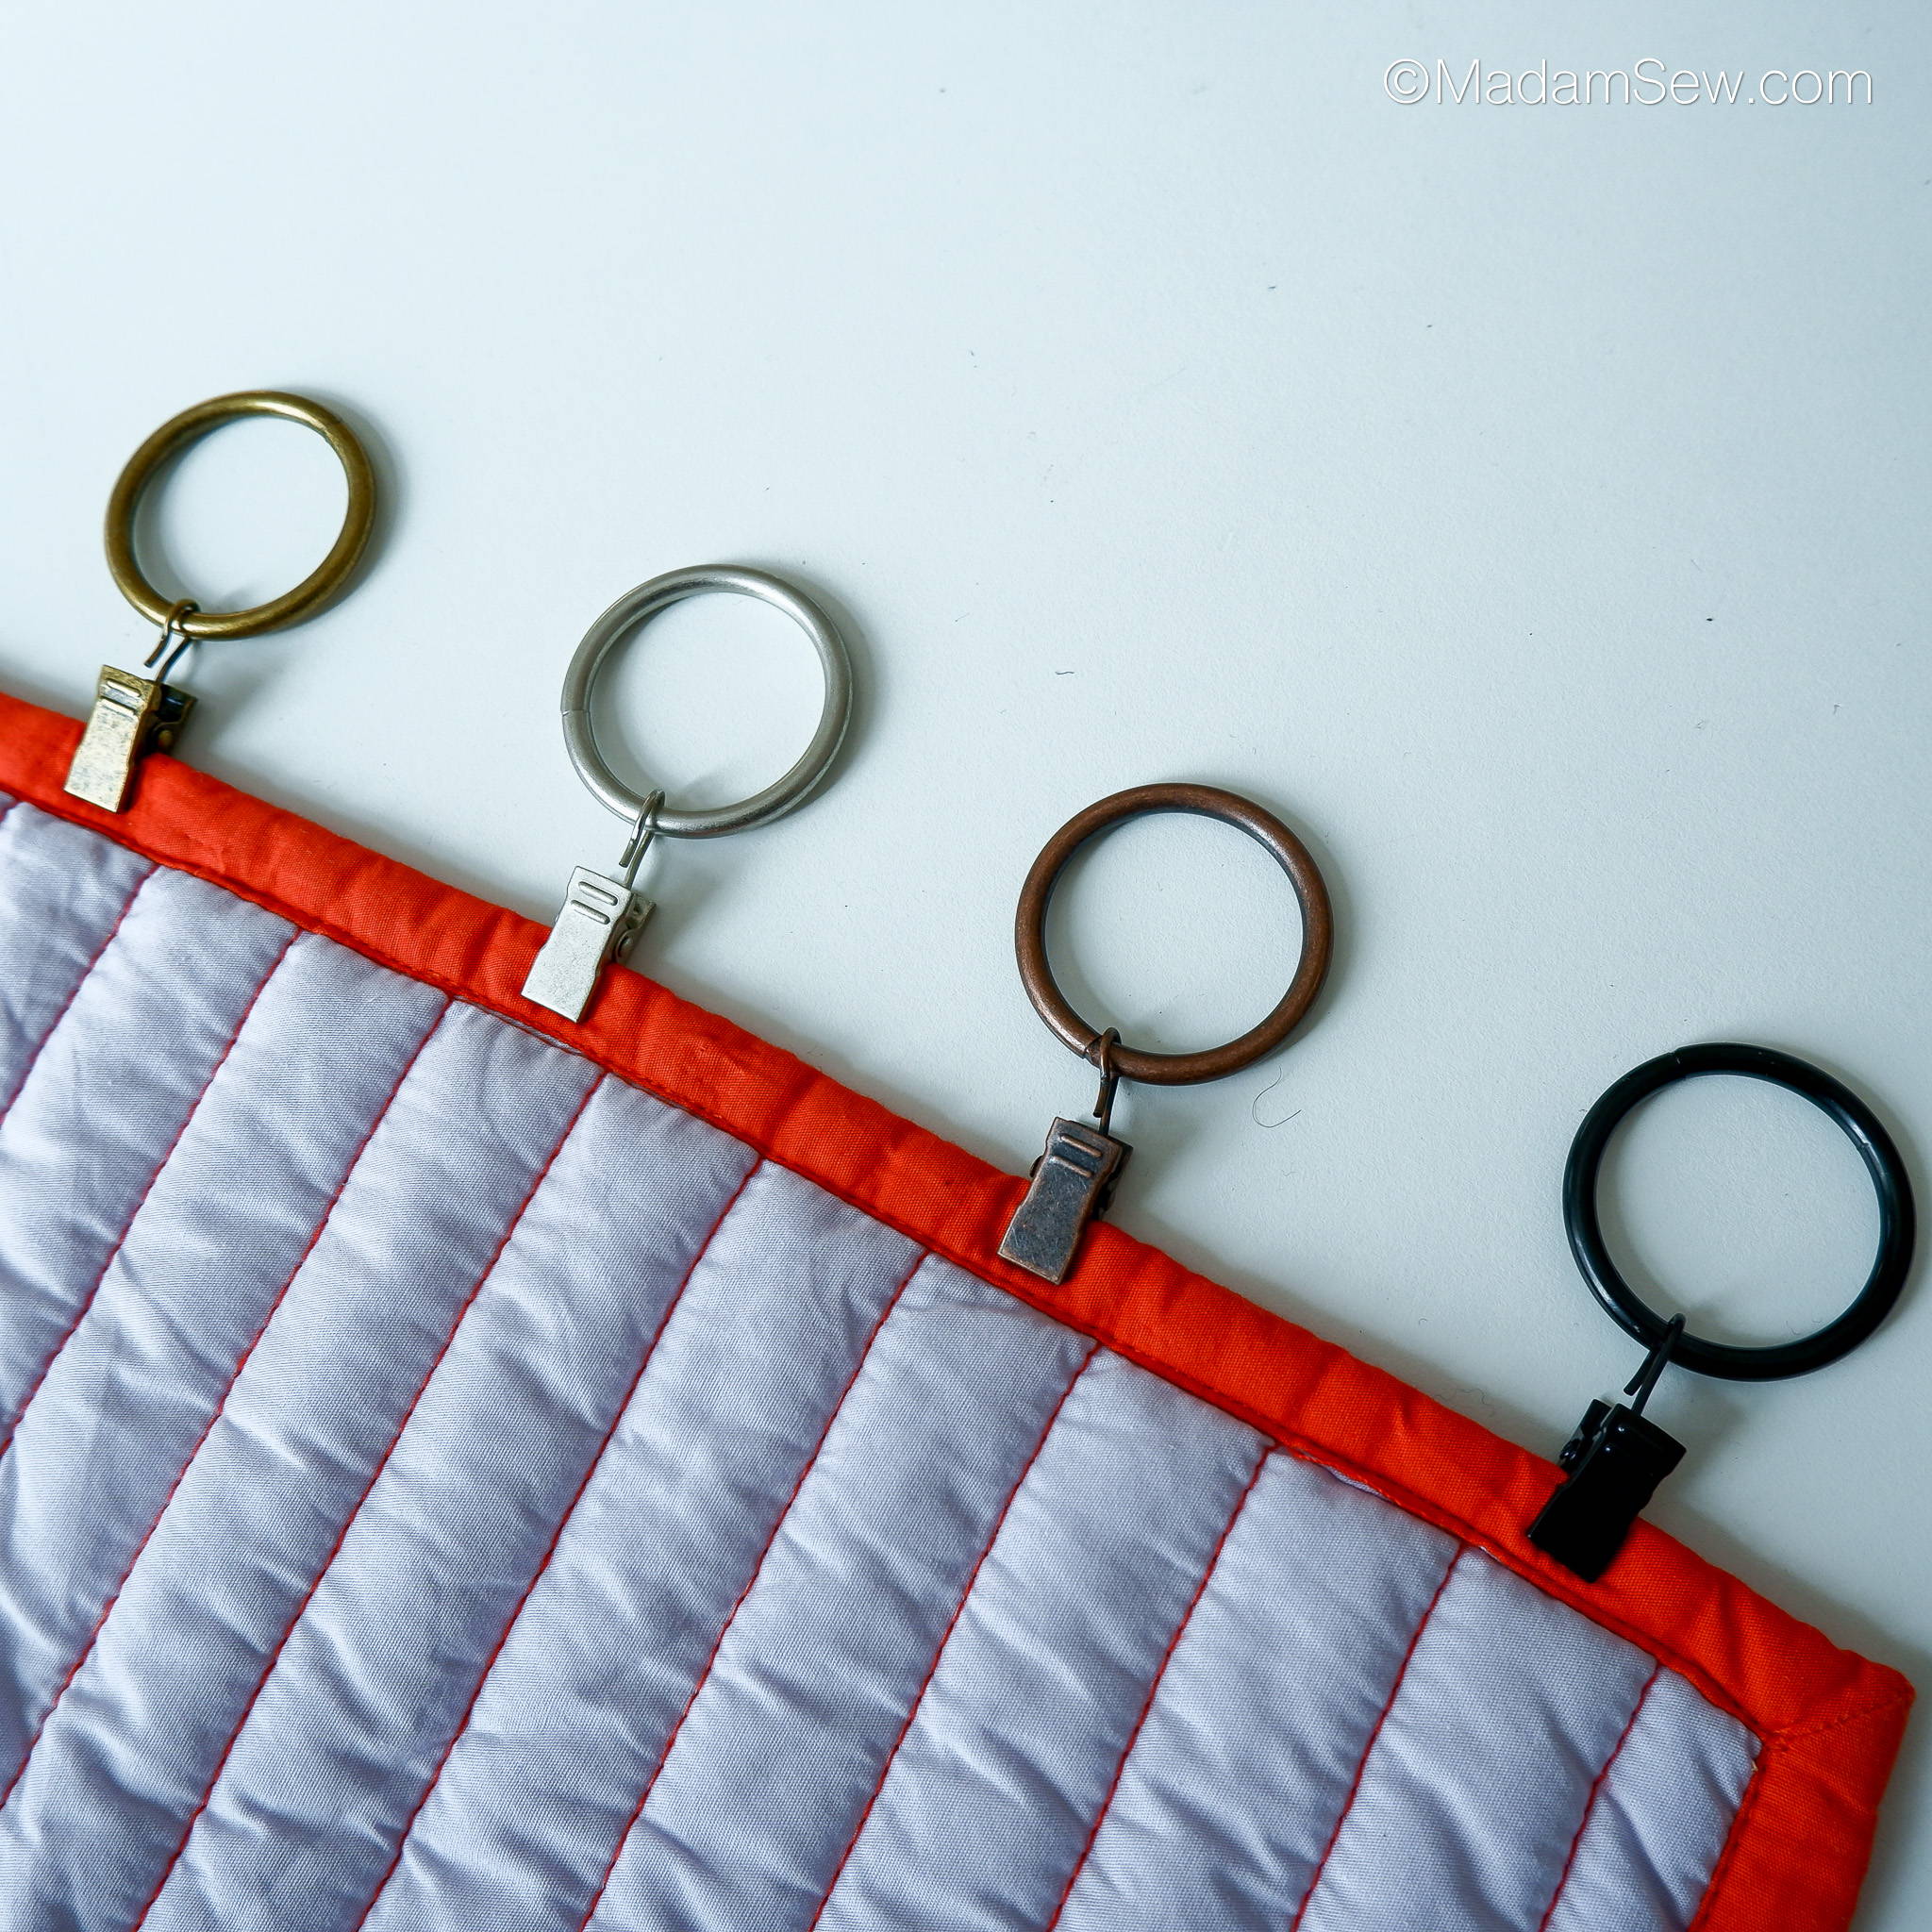 METAL CURTAIN AND QUILT HANGERS INSTRUCTIONS